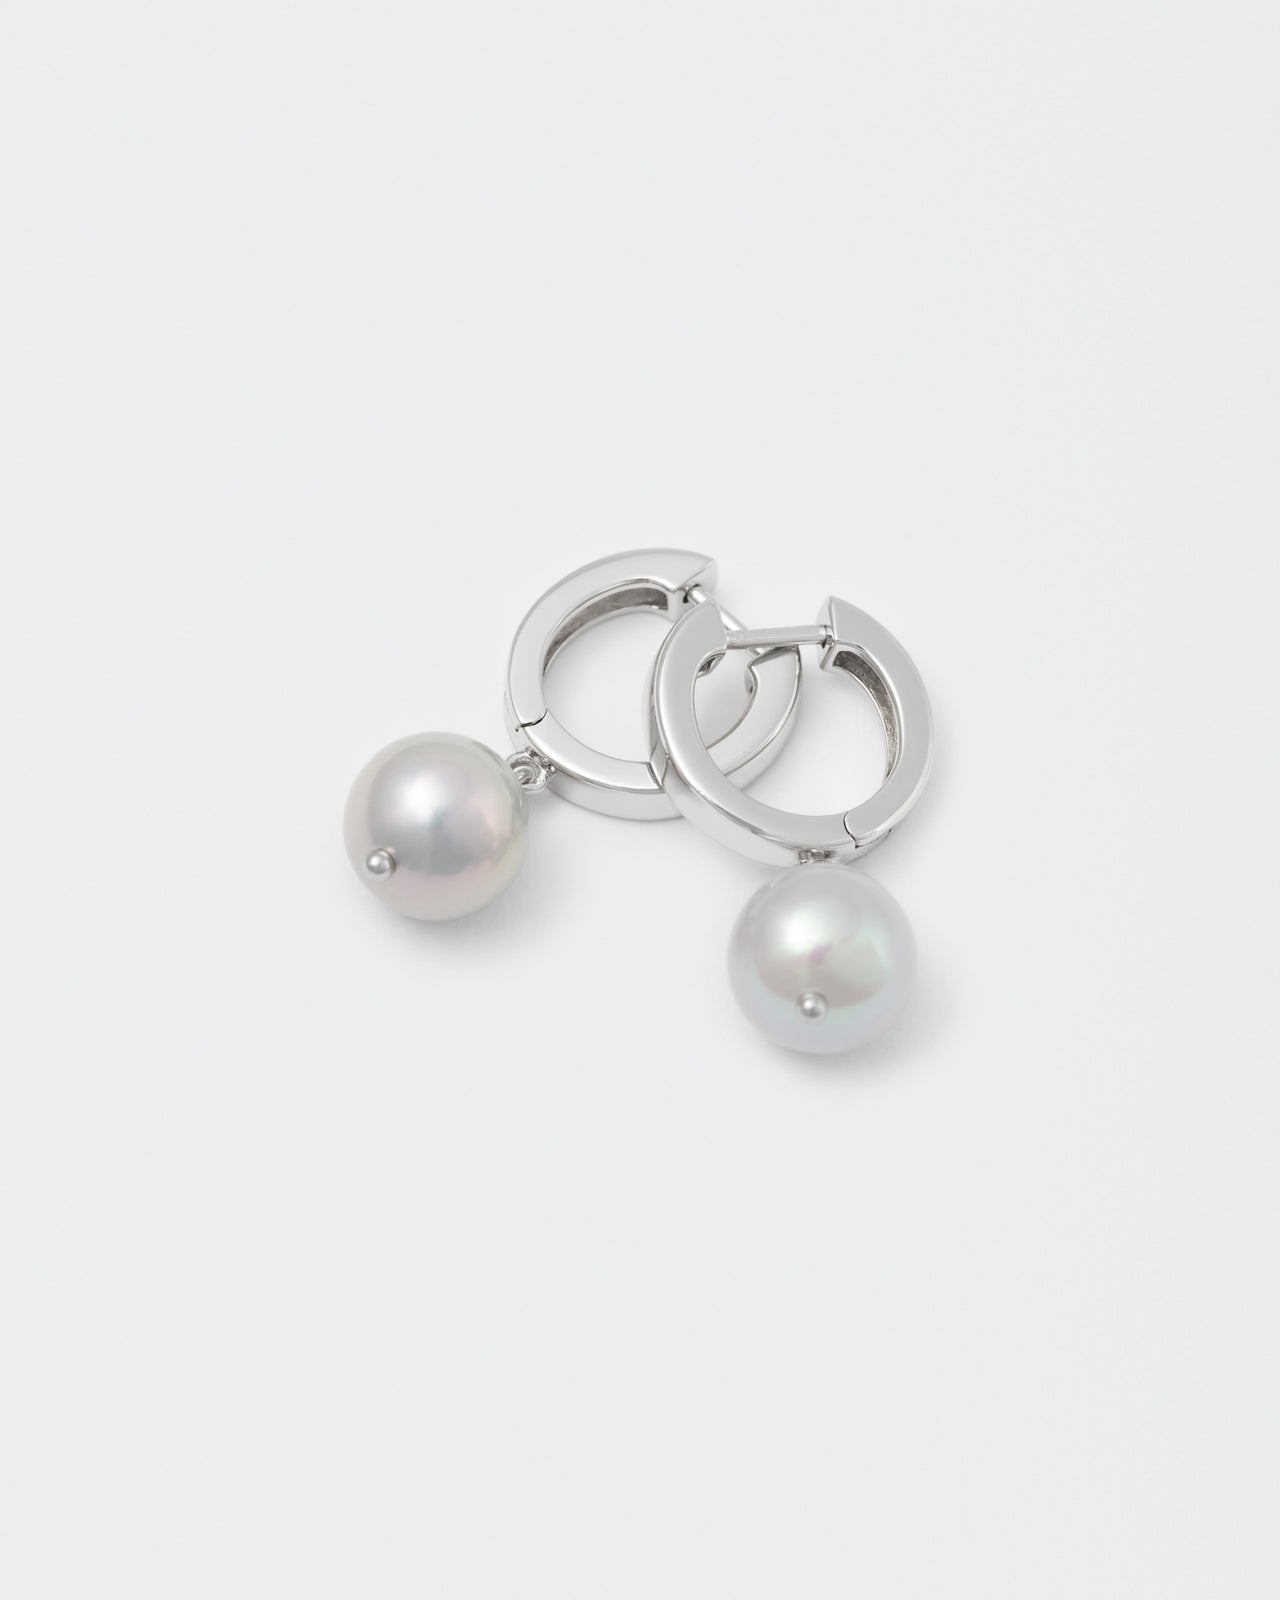 18k white gold coated pearl earrings with central natural indonesian freshwater pearl in silver grey